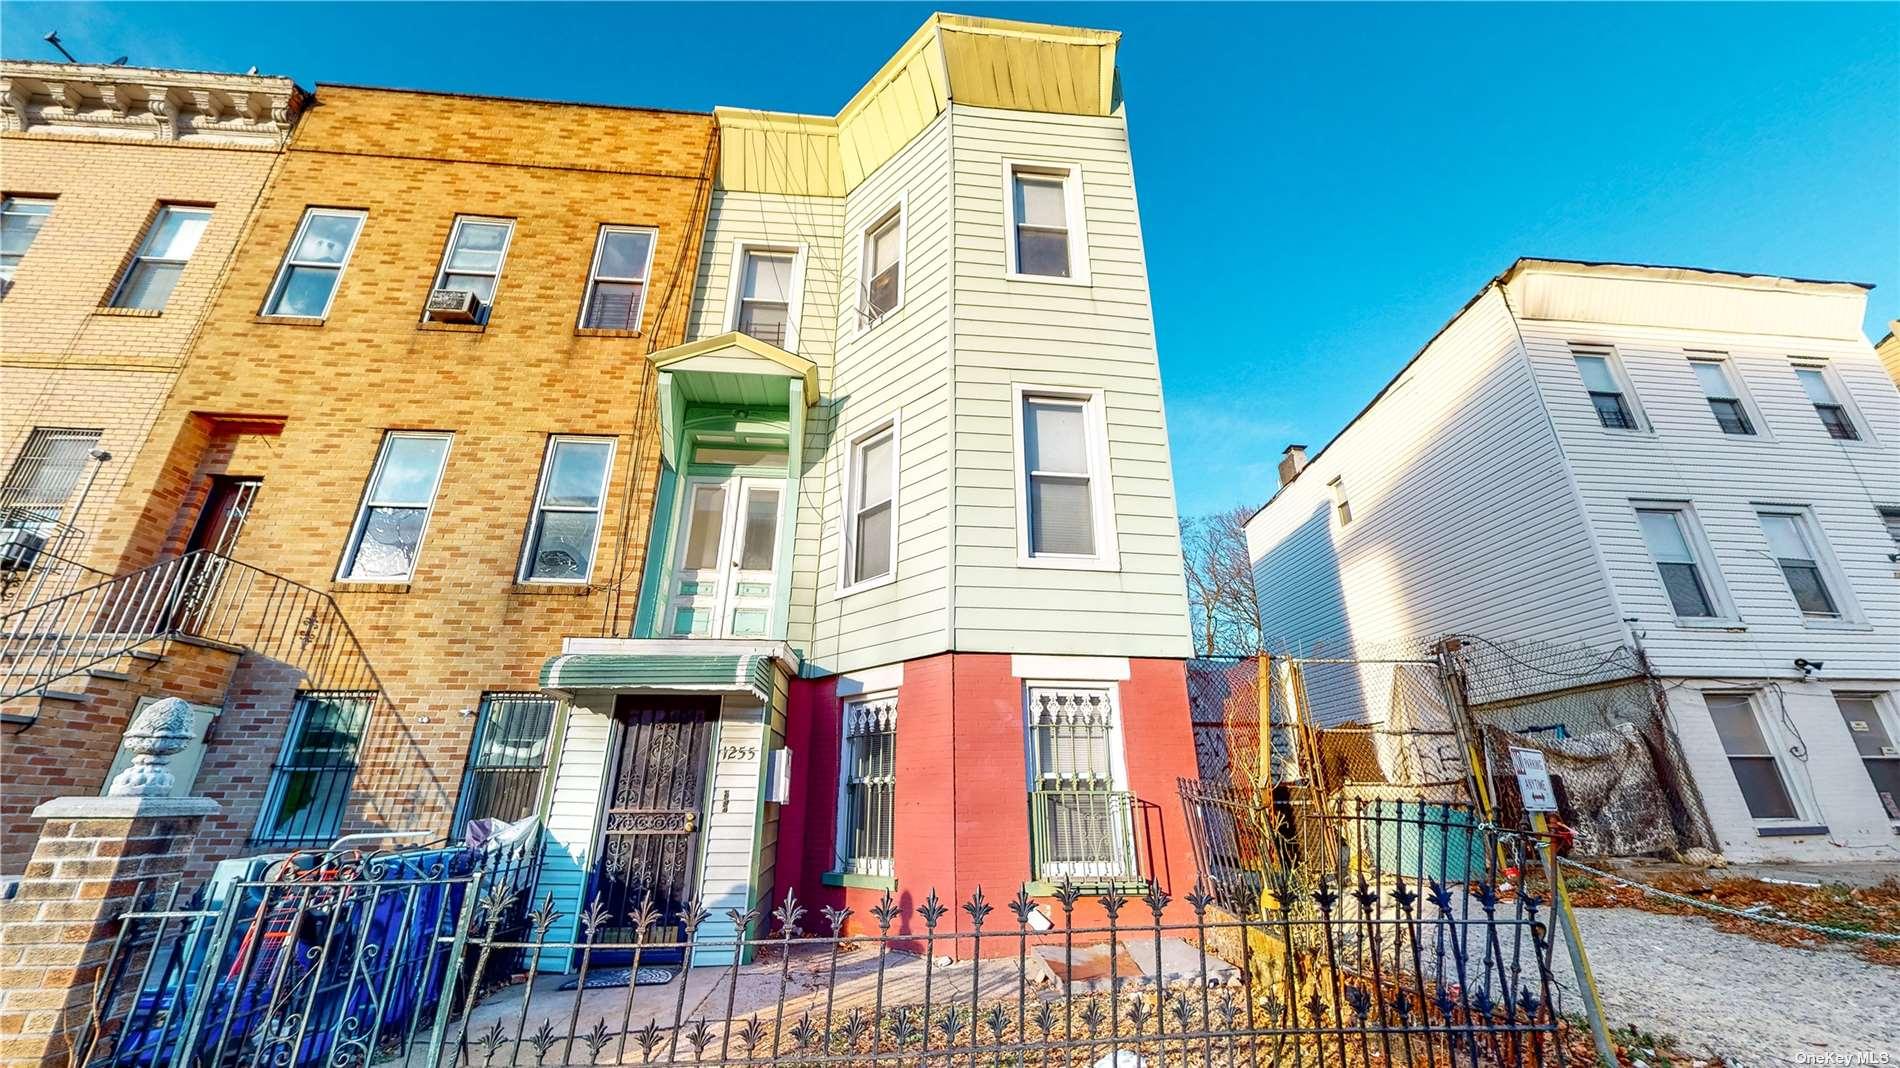 1255 St Marks Avenue in Brooklyn, Crown Heights, NY 11213